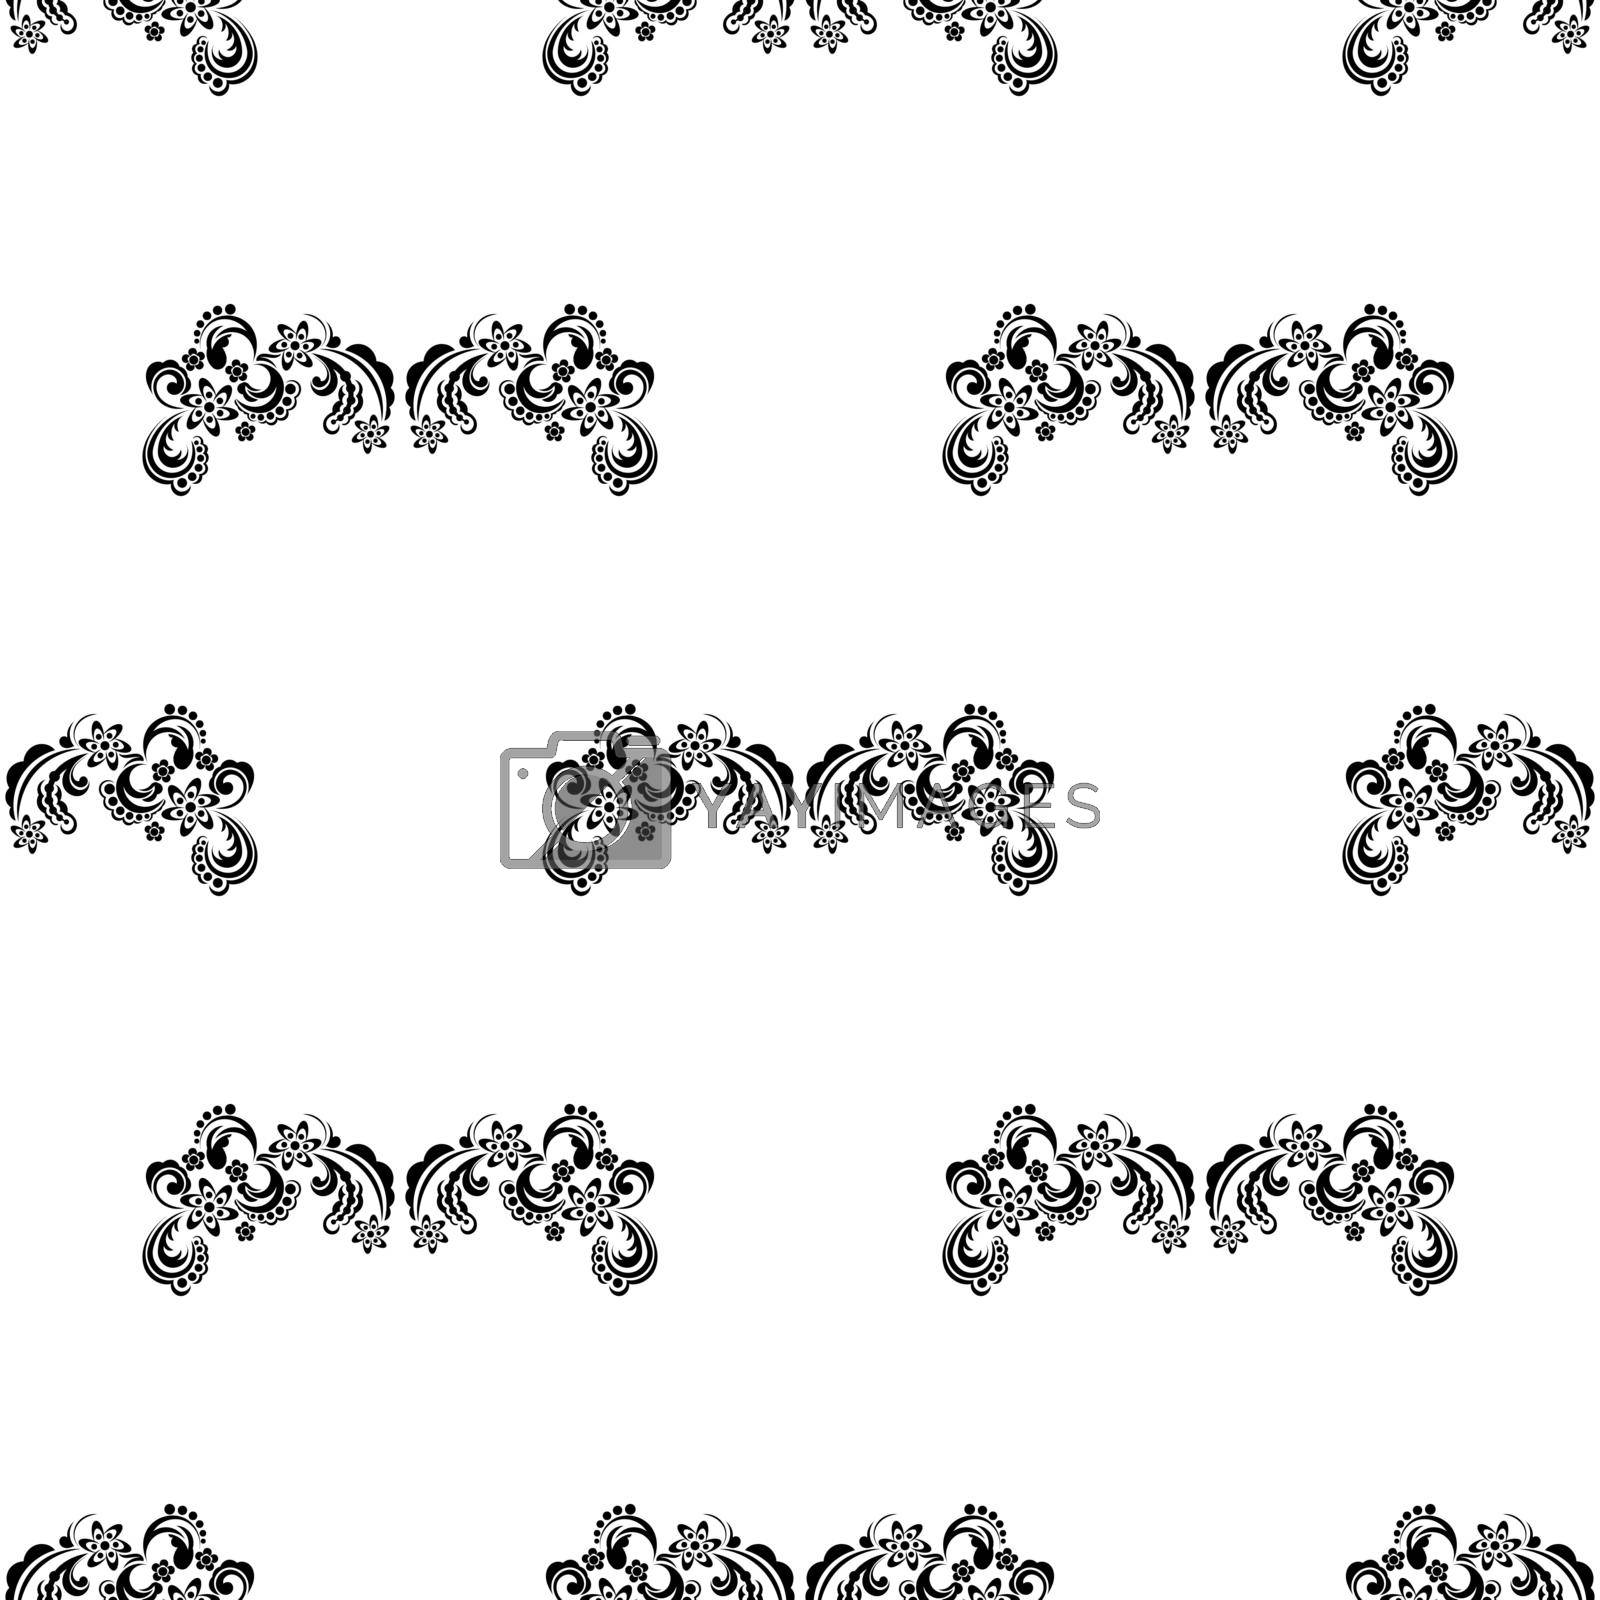 Seamless black and white pattern with monograms in the Baroque style. Good for backgrounds and prints. Vector illustration.